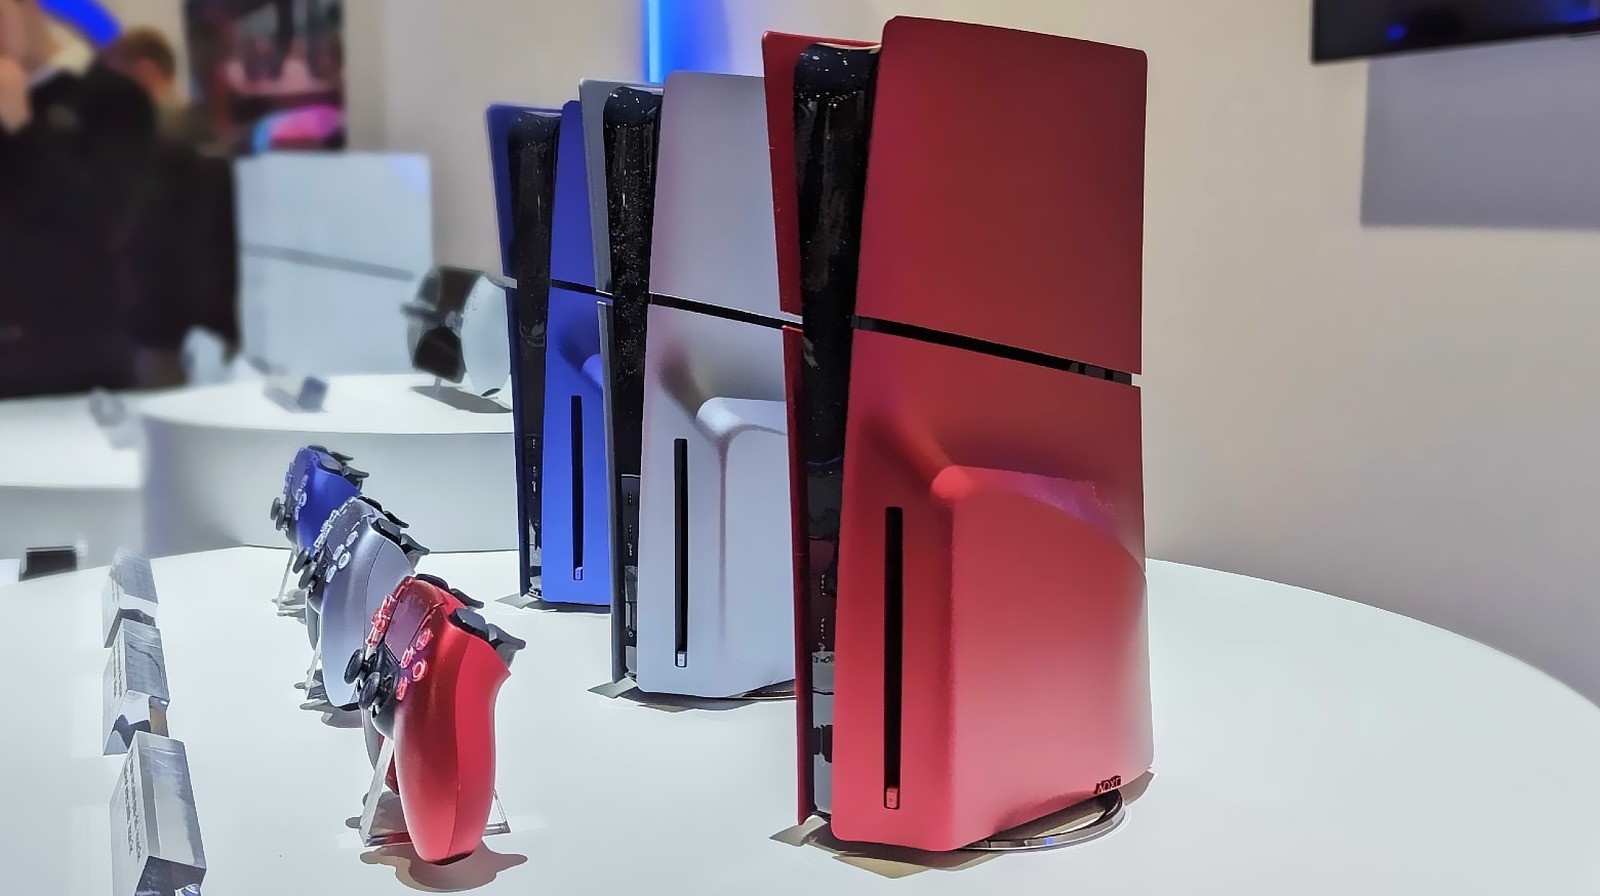 Sony Shows Off PS5 Slim With Colorful Metallic Console Covers